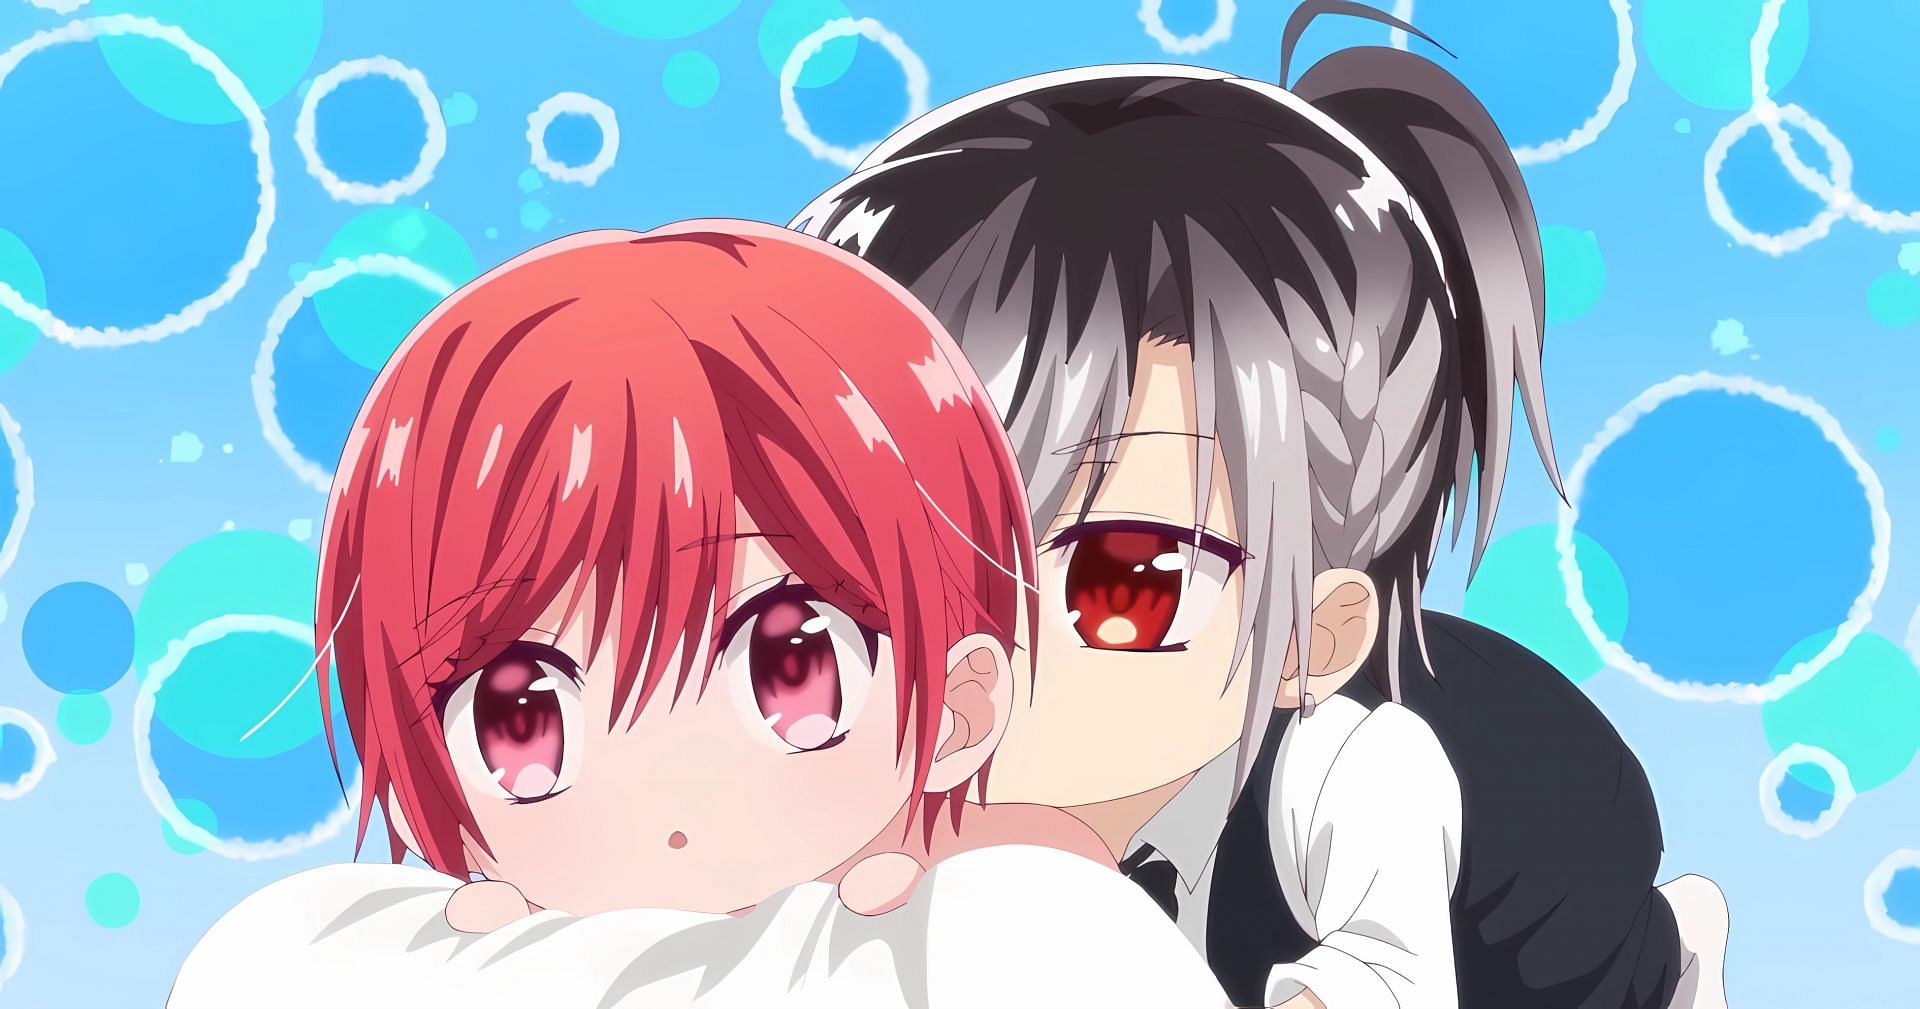 Mito (left) and Ruka (right) as seen in the third episode (Image via Studio Blanc)